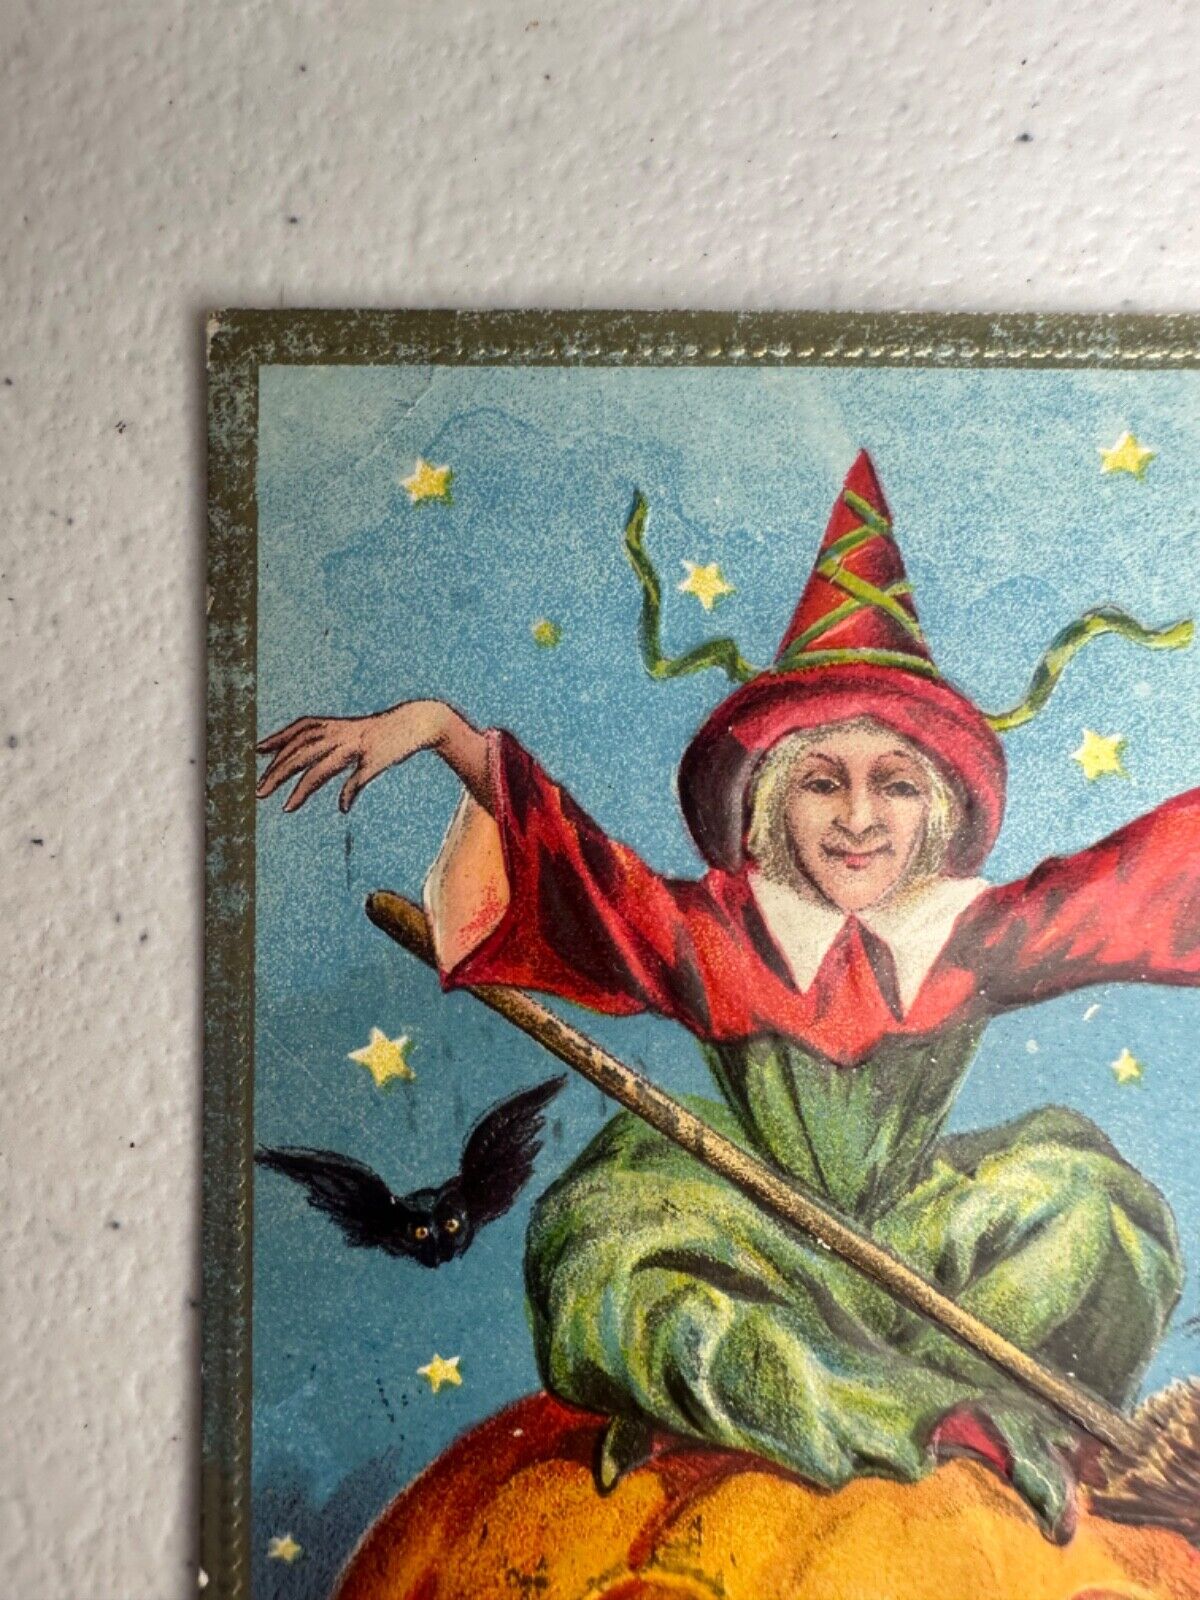 Rare 1911 Antique Halloween Postcard - Embossed Witch, Pumpkin, Bat & Black Cat - Collectible from Iowa - TreasuTiques